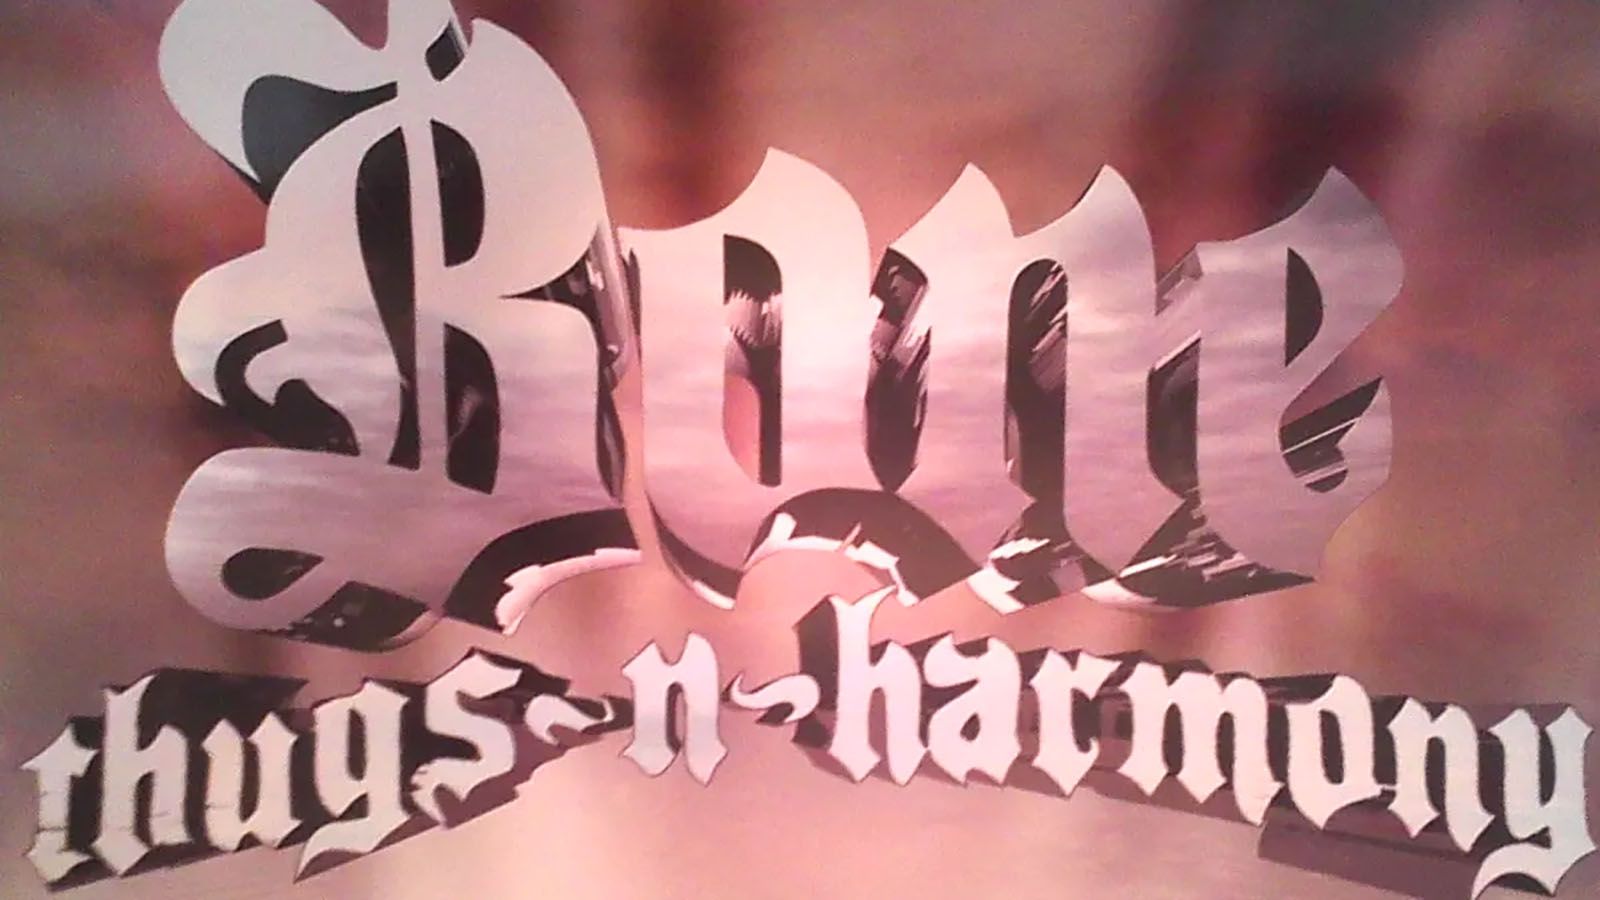 Bone Thugs-n-Harmony will be at Piere's on Friday, Feb. 2.